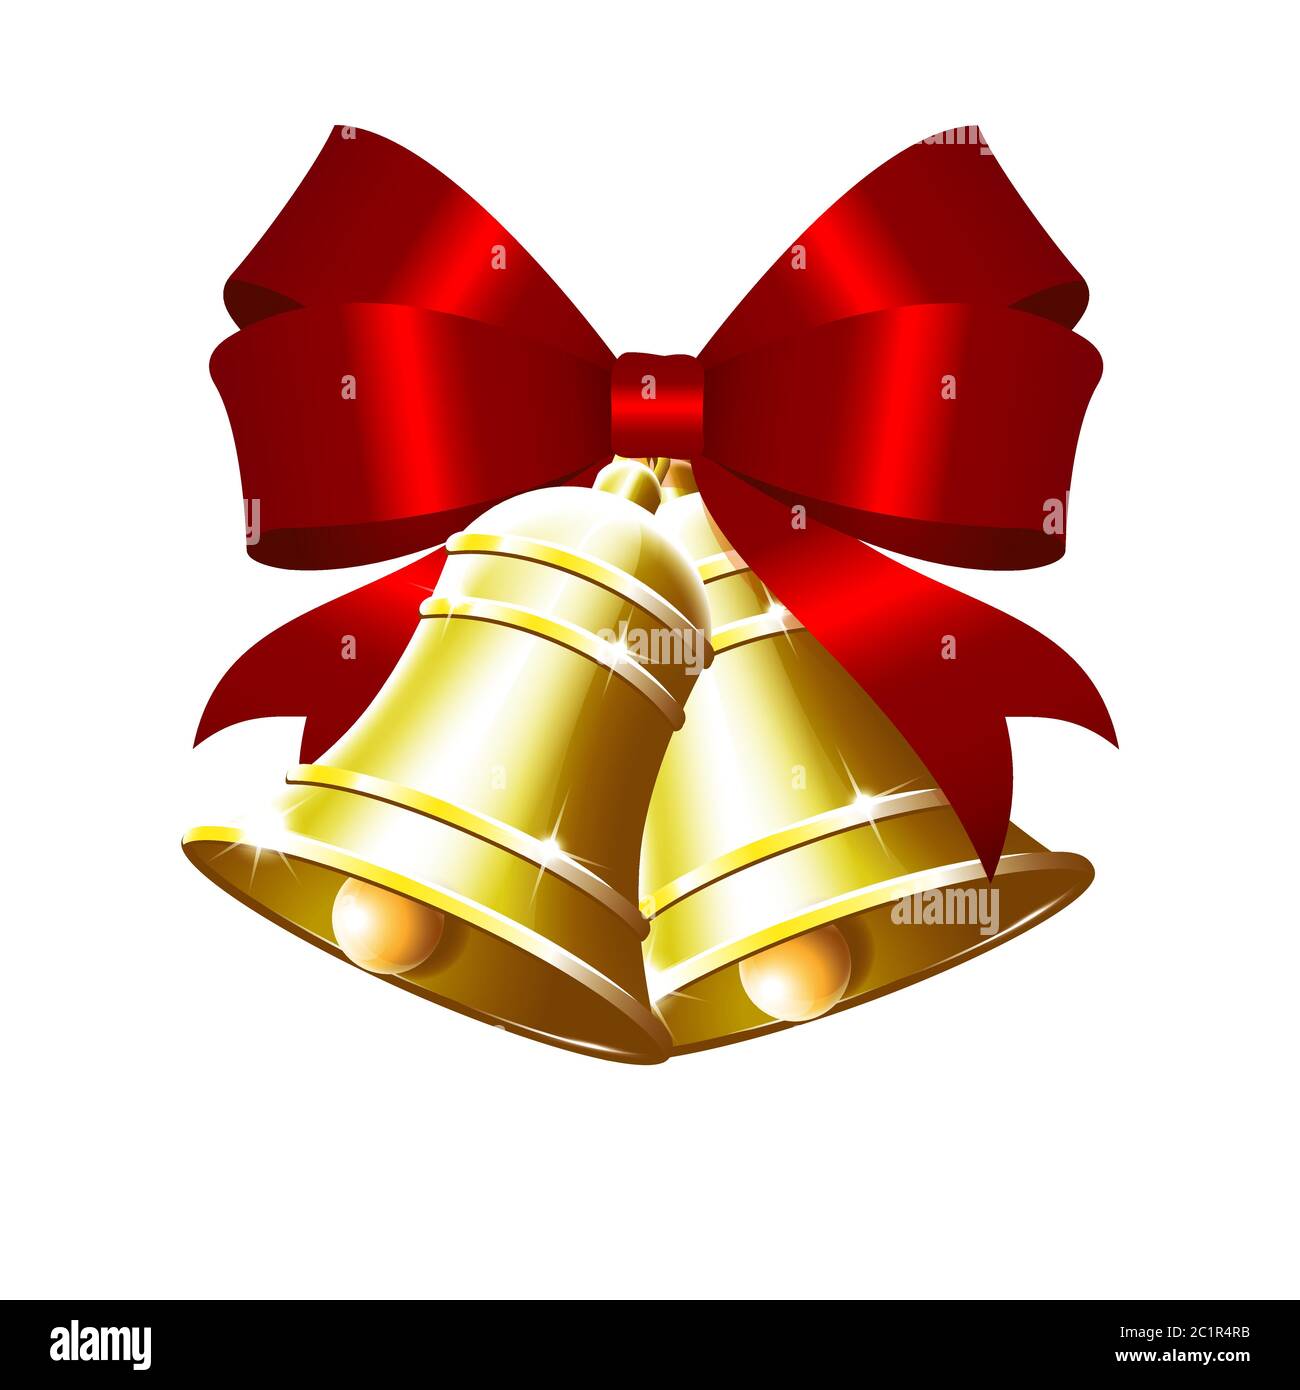 Christmas bells. Jingle bells or sleigh bells with red bow